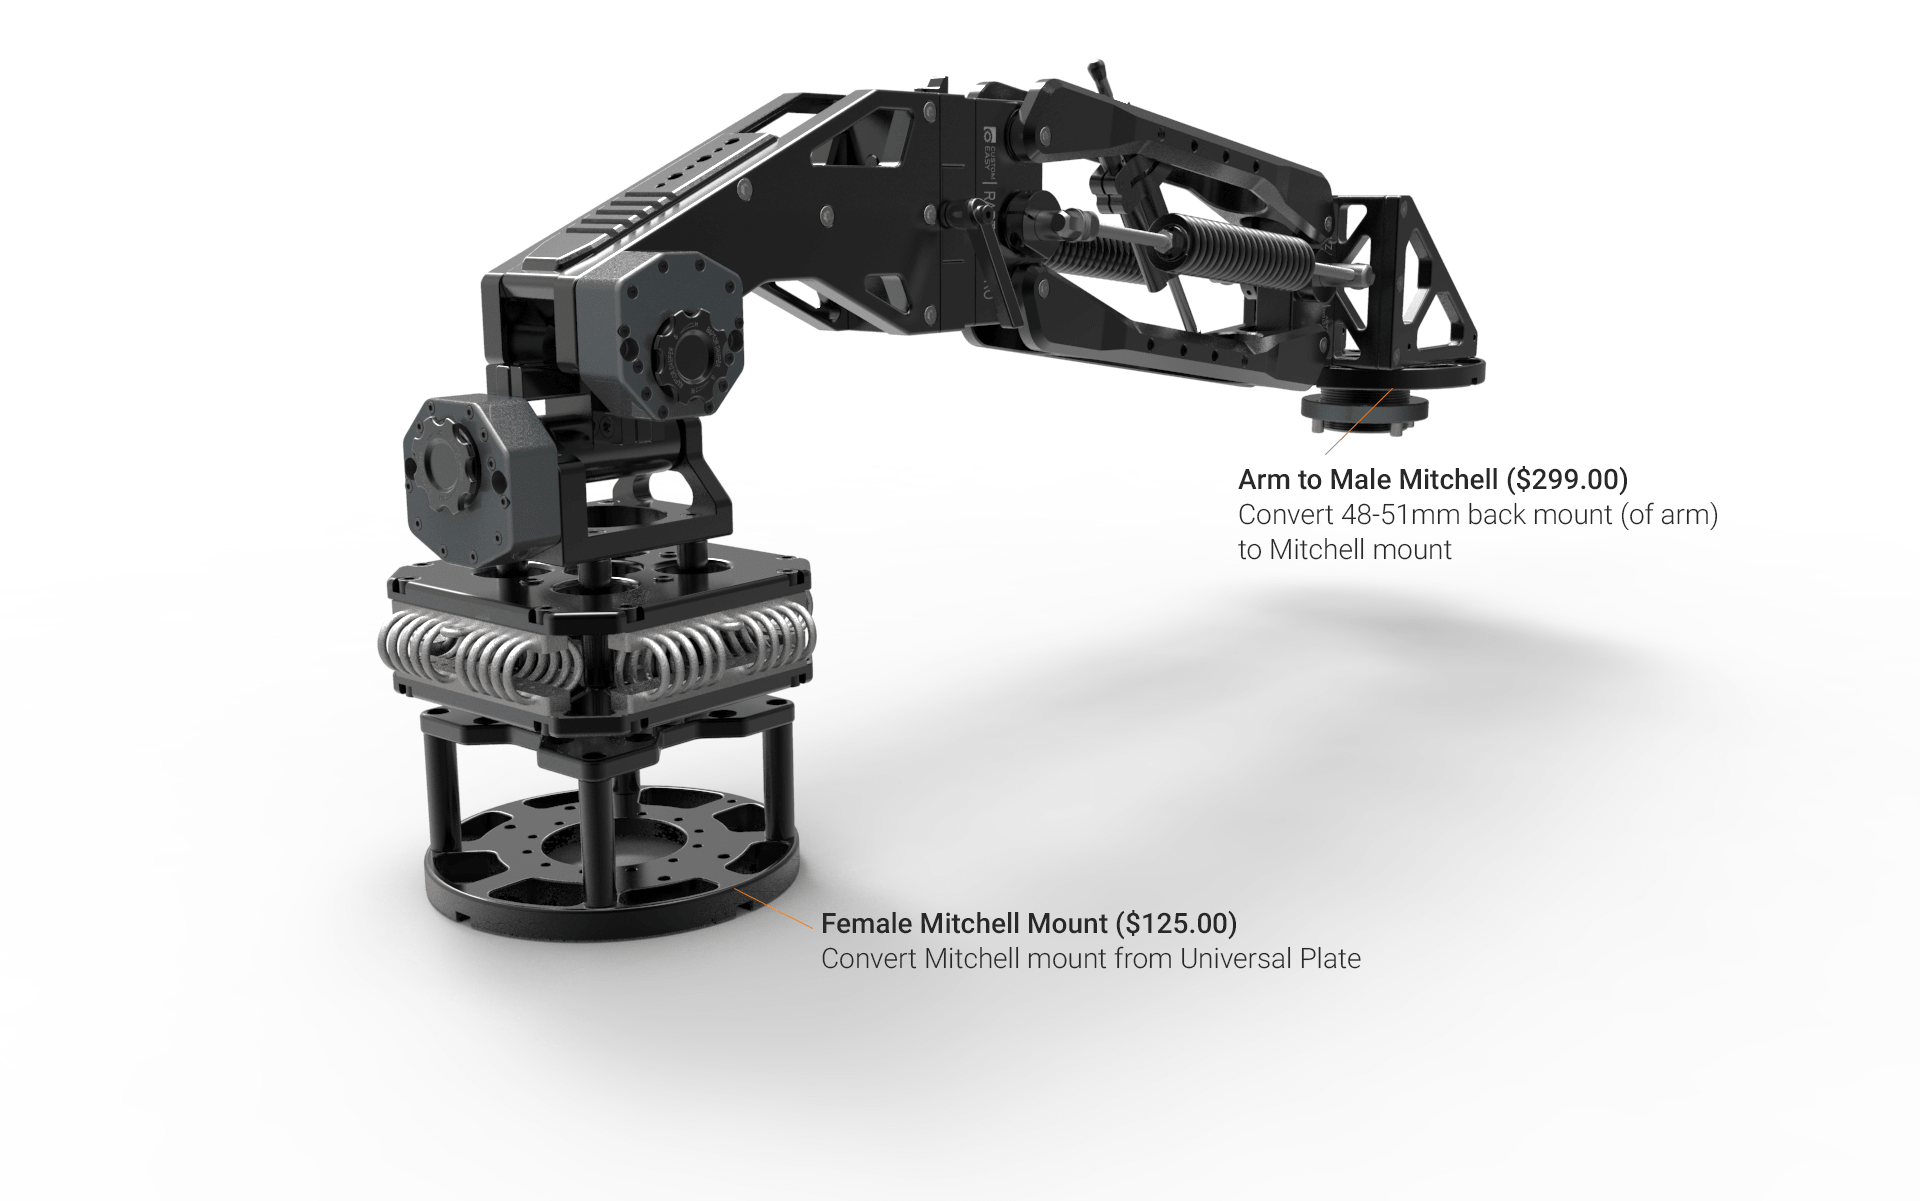 Raptor Z Pro with Arm to Male Mitchell and Female Mitchell Mount